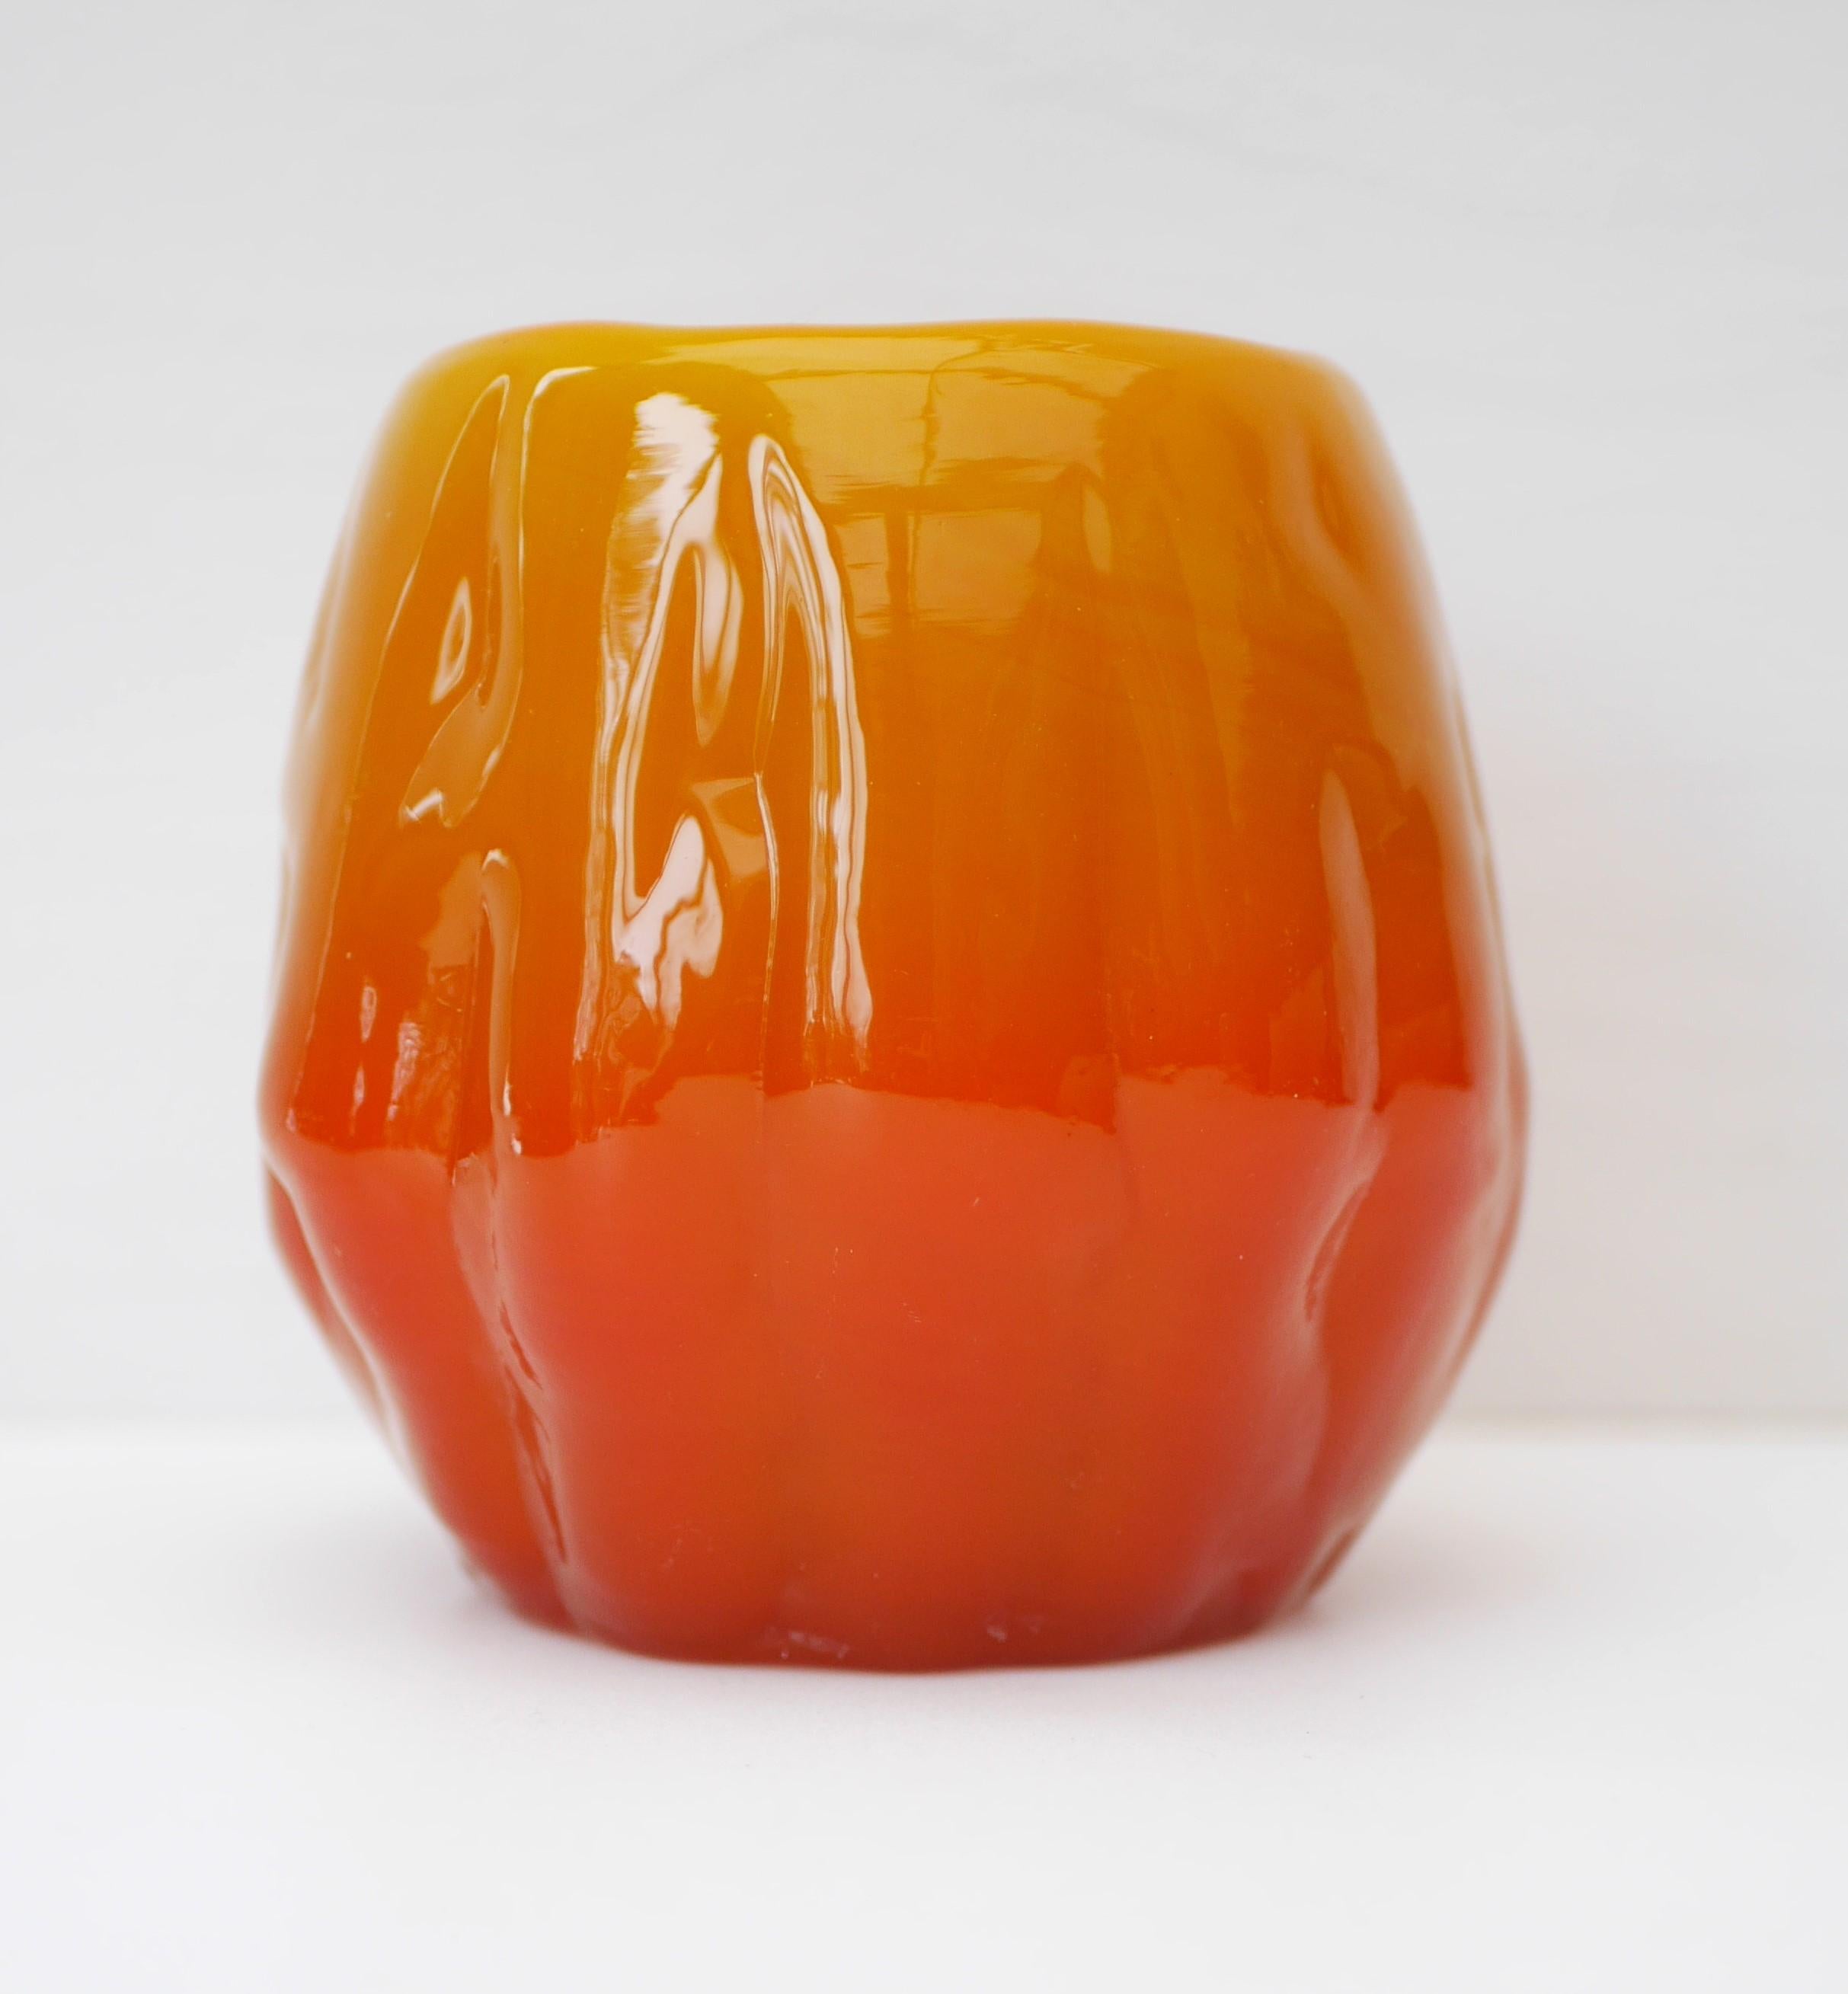 A stunning massive bright orange vintage glass vase from the Selena series, made by the talented Göte Augustsson for Ruda Glasbruk, Sweden. This is a very special piece with a bold design. It has a very bright orange base which fades into a yellow